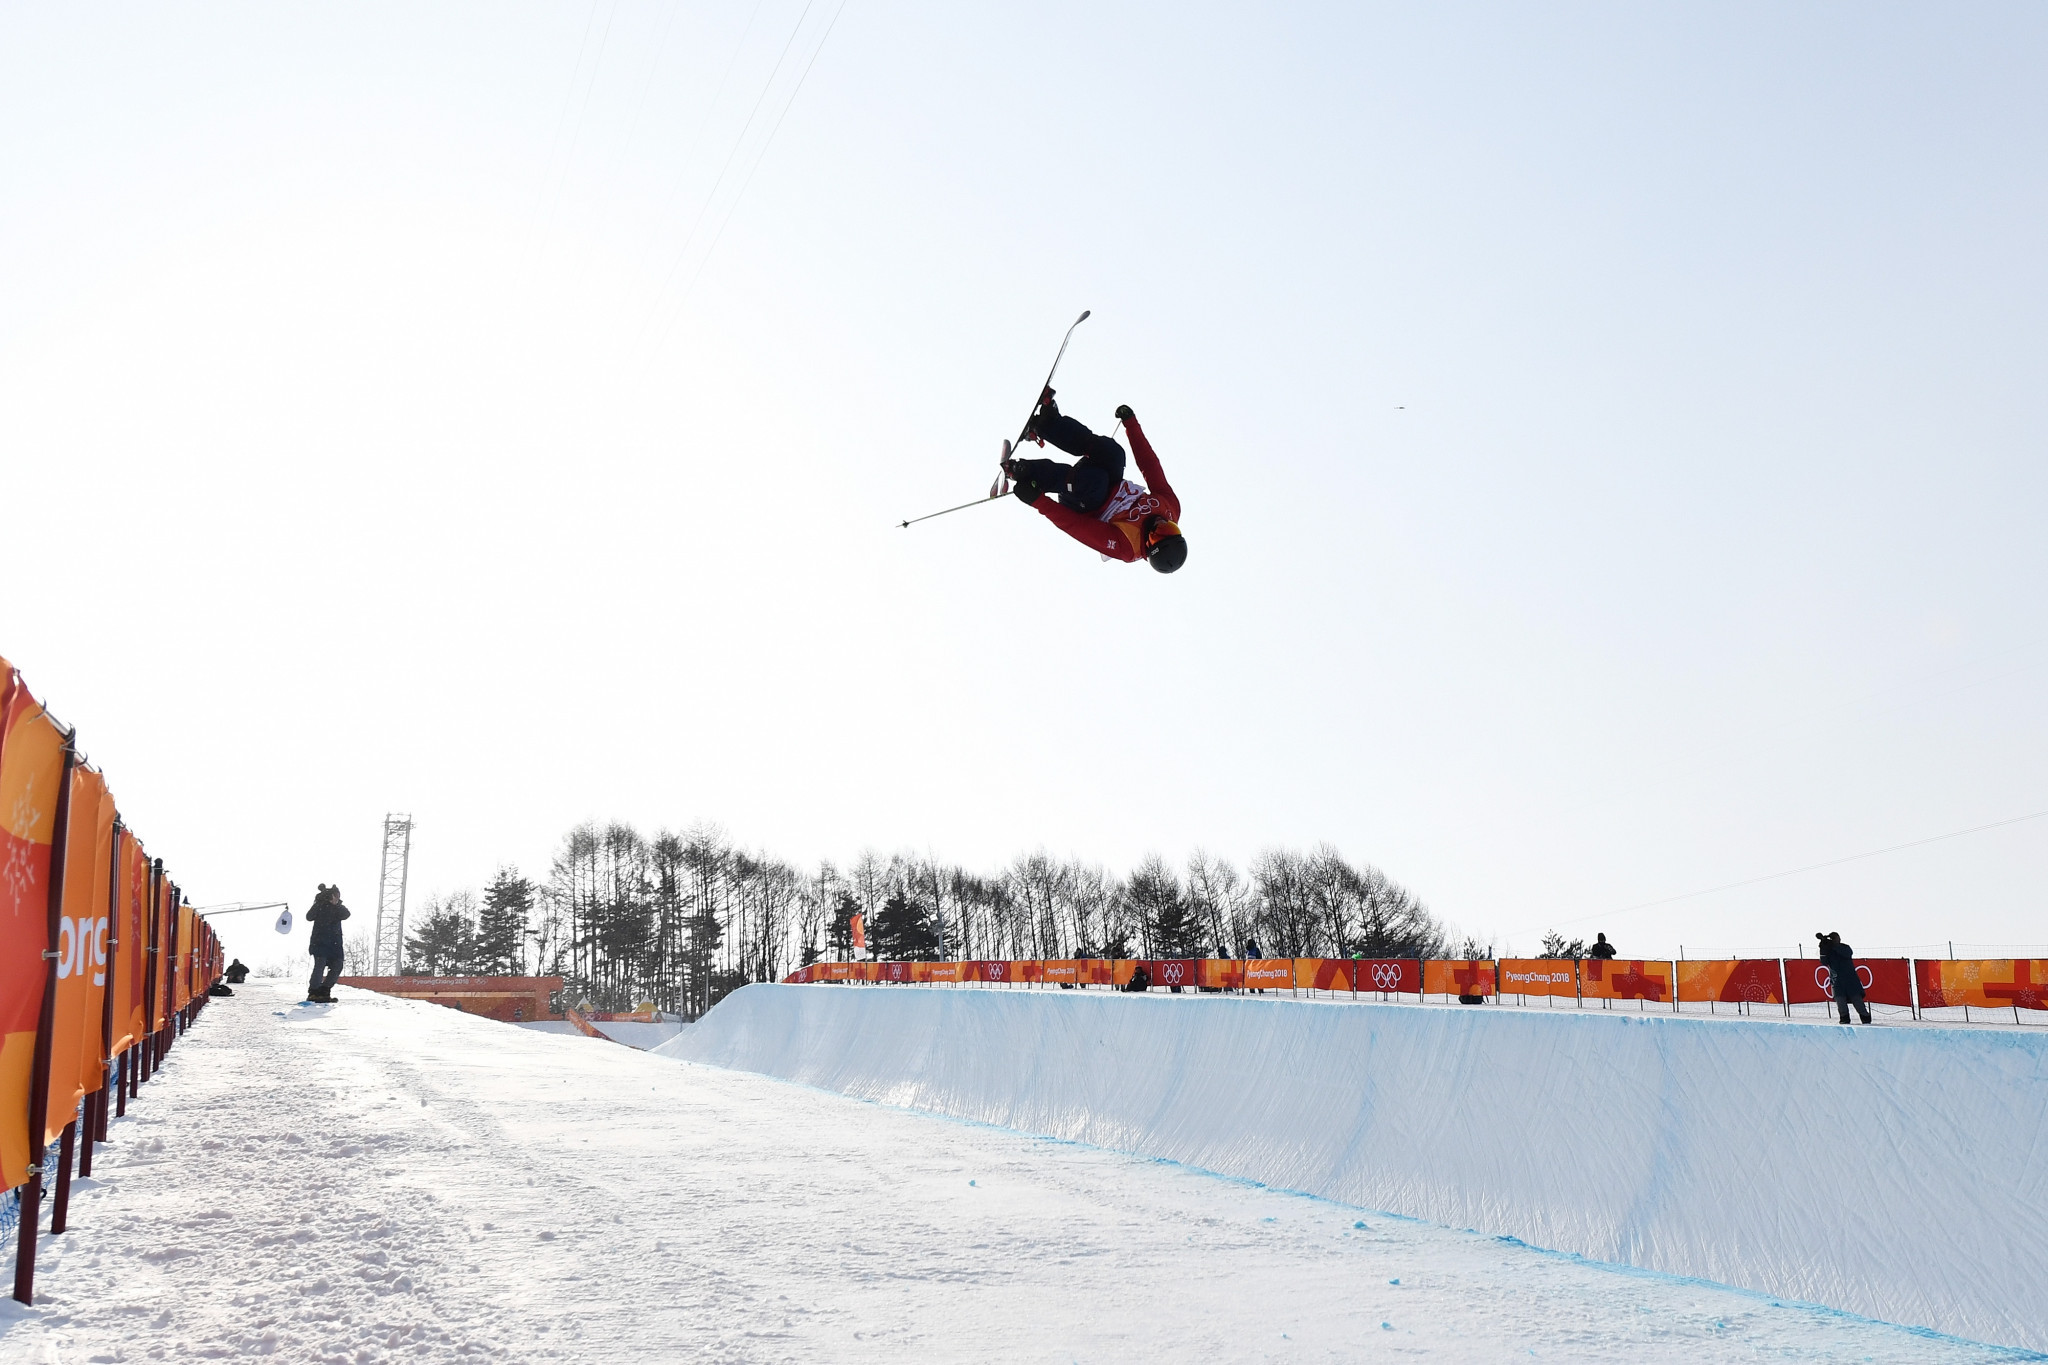 A skier takes to the halfpipe course at Pyeongchang 2018 ©Getty Images